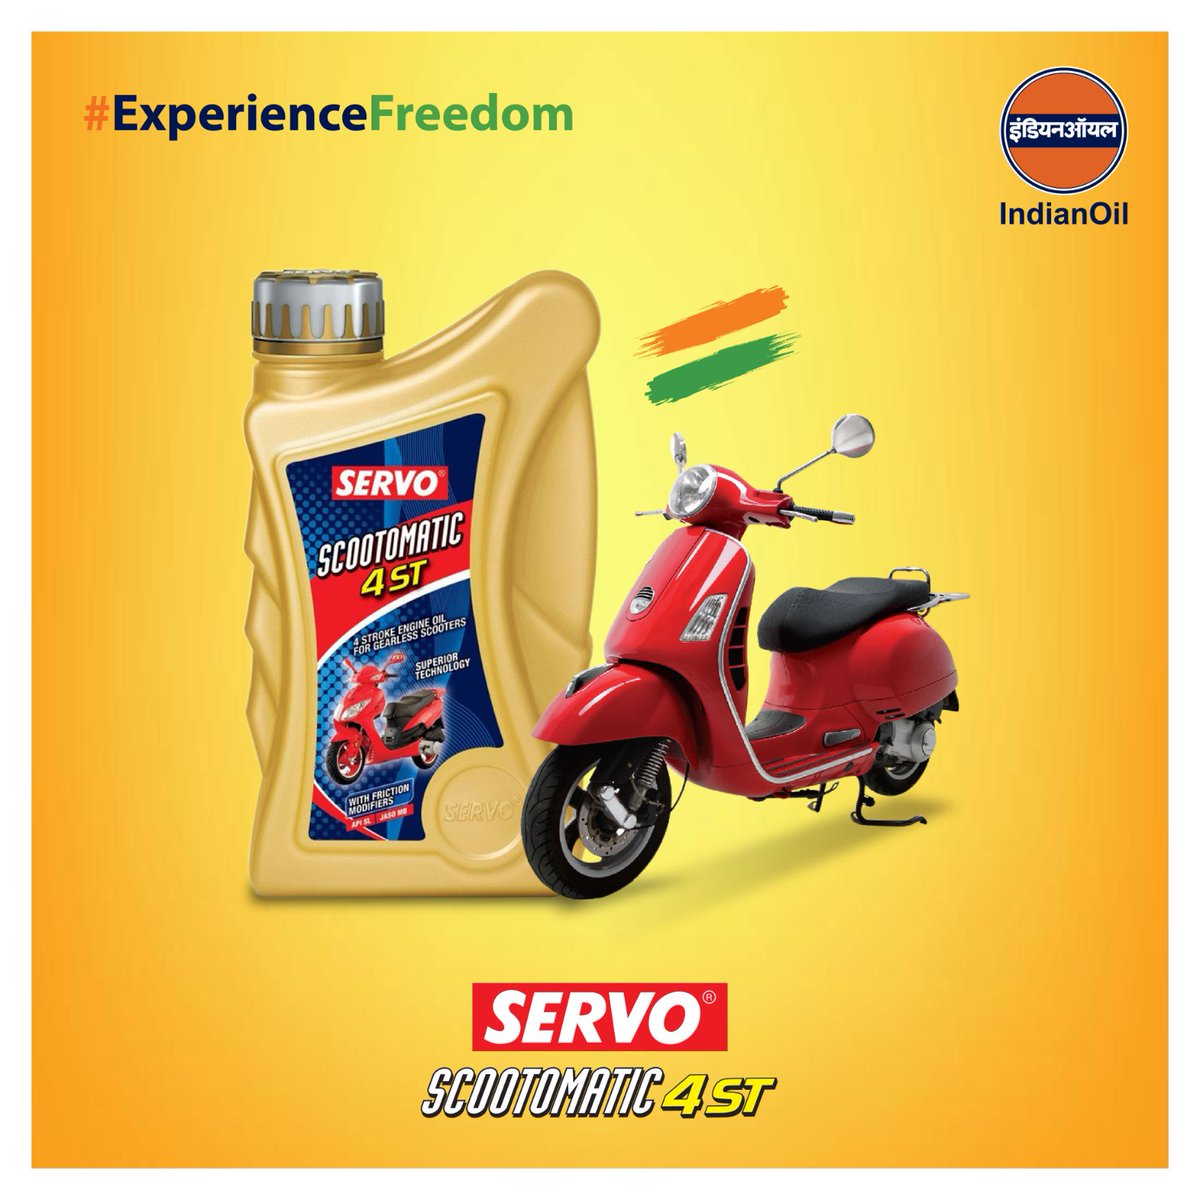 Keep your scooter fit and young, by using SERVO SCOOTOMATIC 4ST 
#ExperienceFreedom #IndependenceDayIndia2020 @IndianOilcl